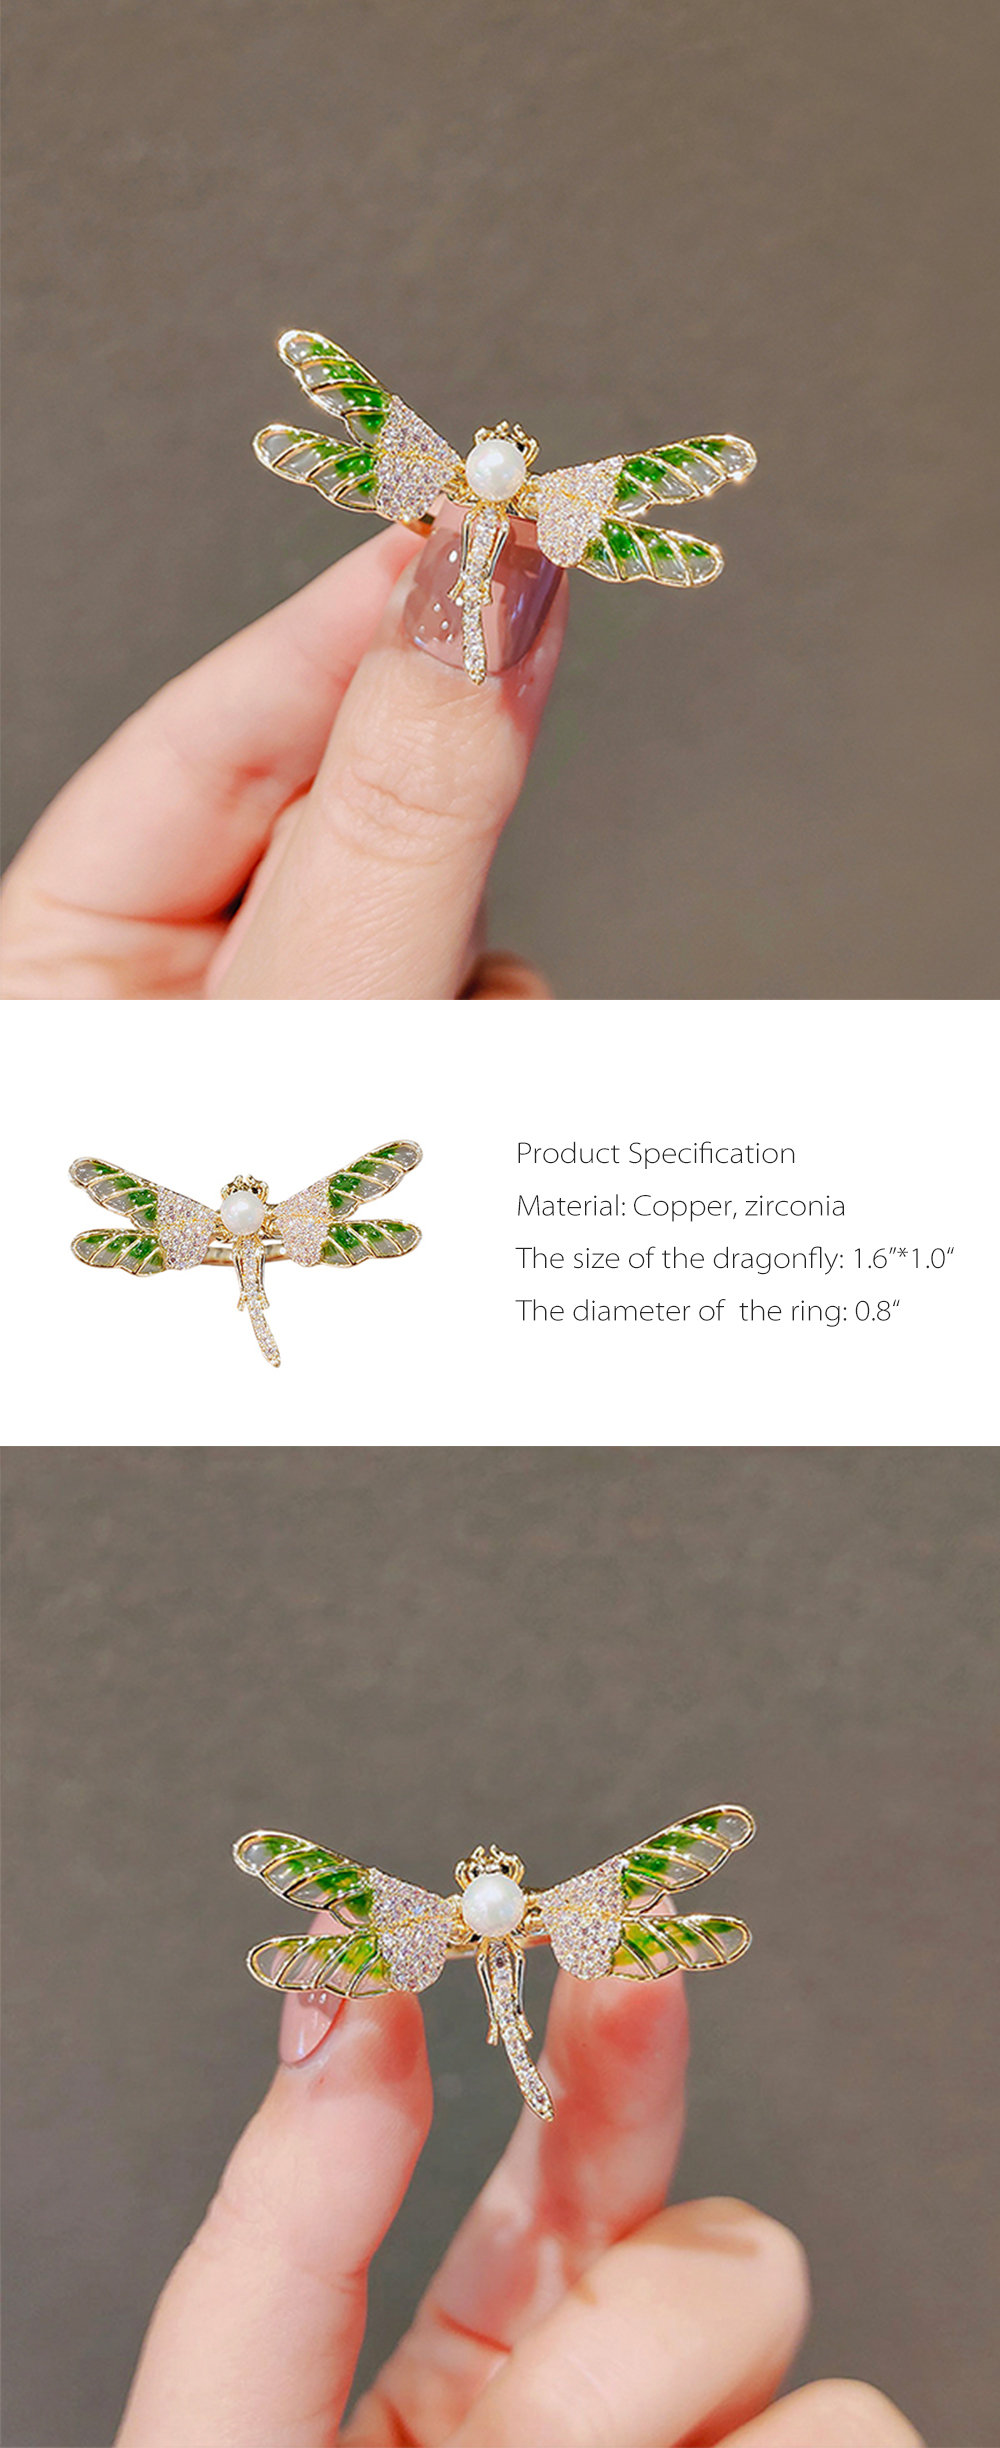 Dragonfly Ornament, Dragonfly Gift, Dragonfly Christmas Ornament -   Canada